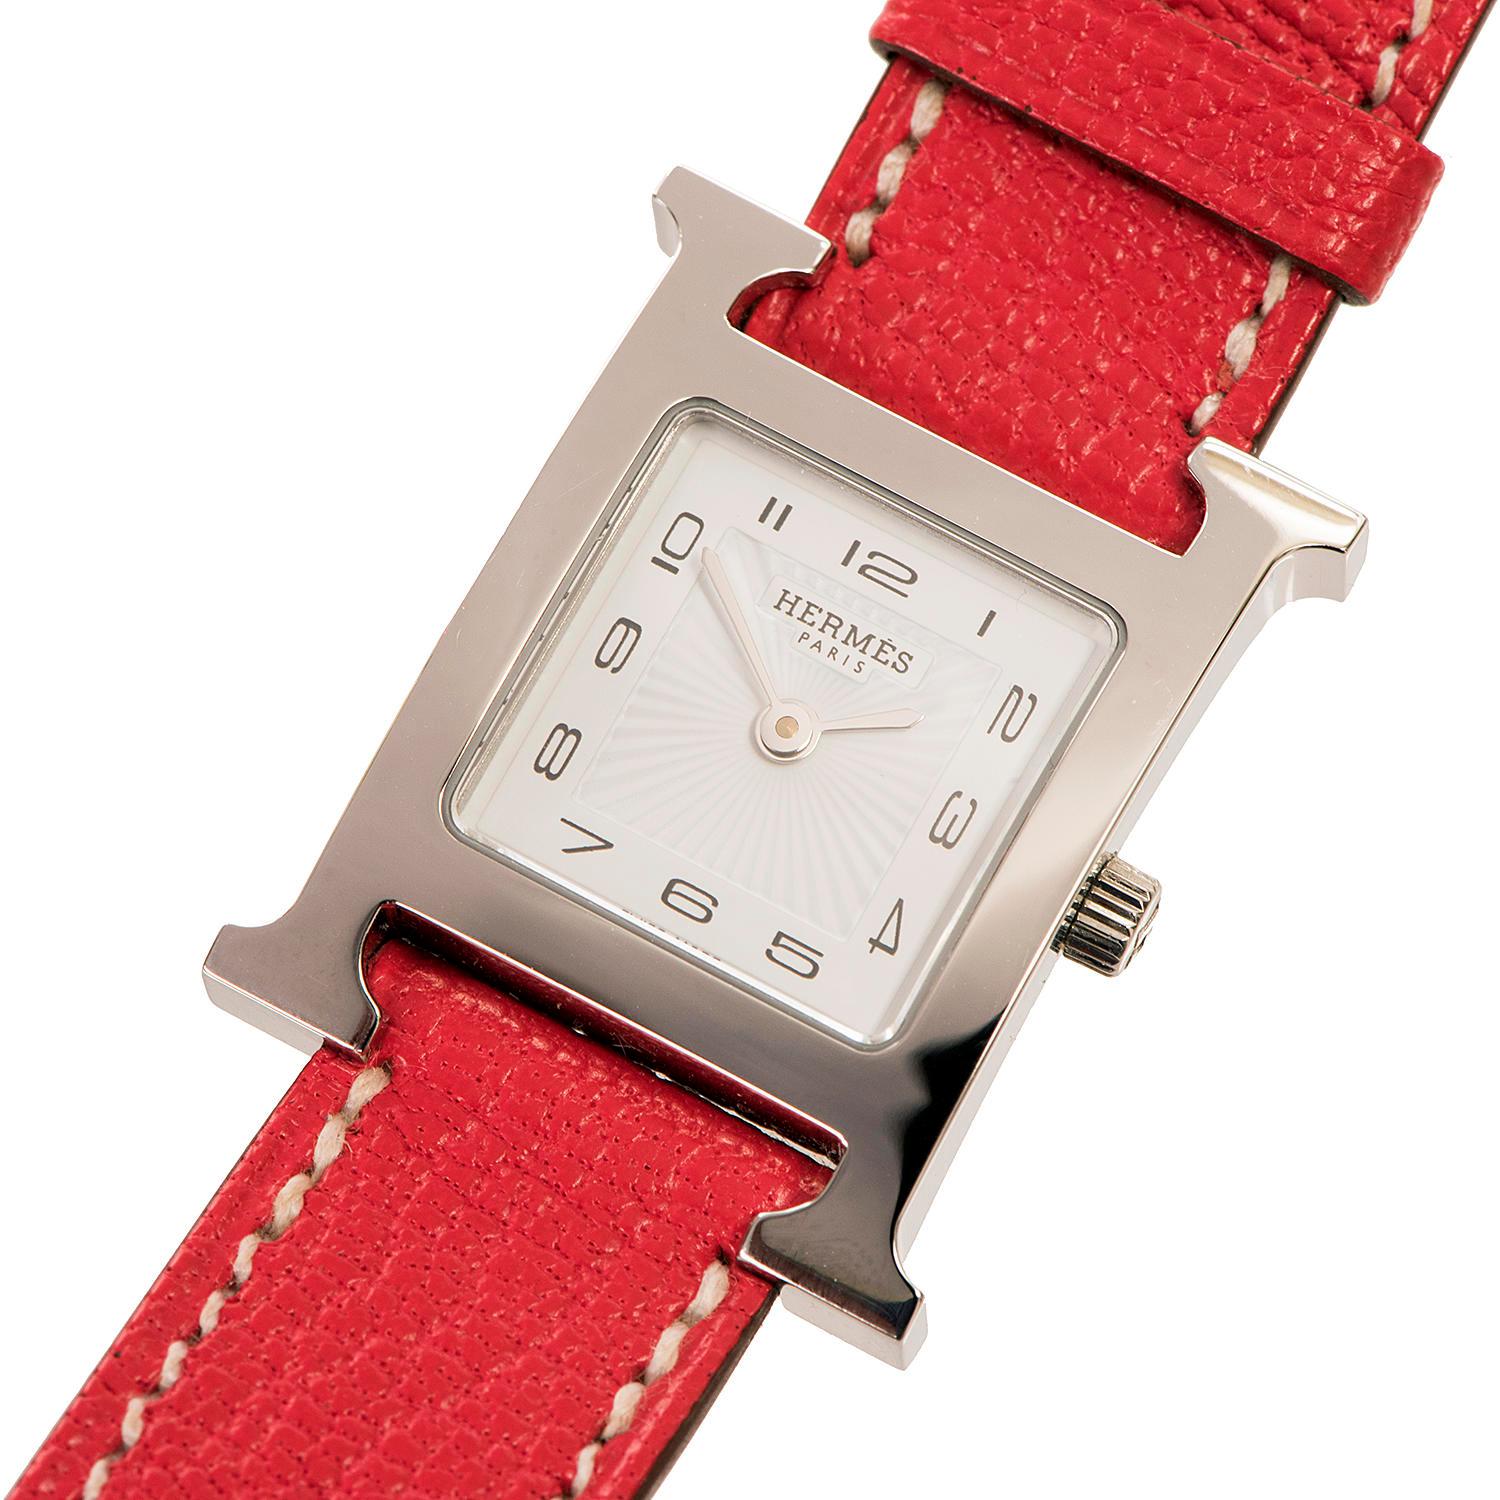 AS NEW - A Boxed Hermes Ladies 'Heure H' double Strap Silver Palladium Watch